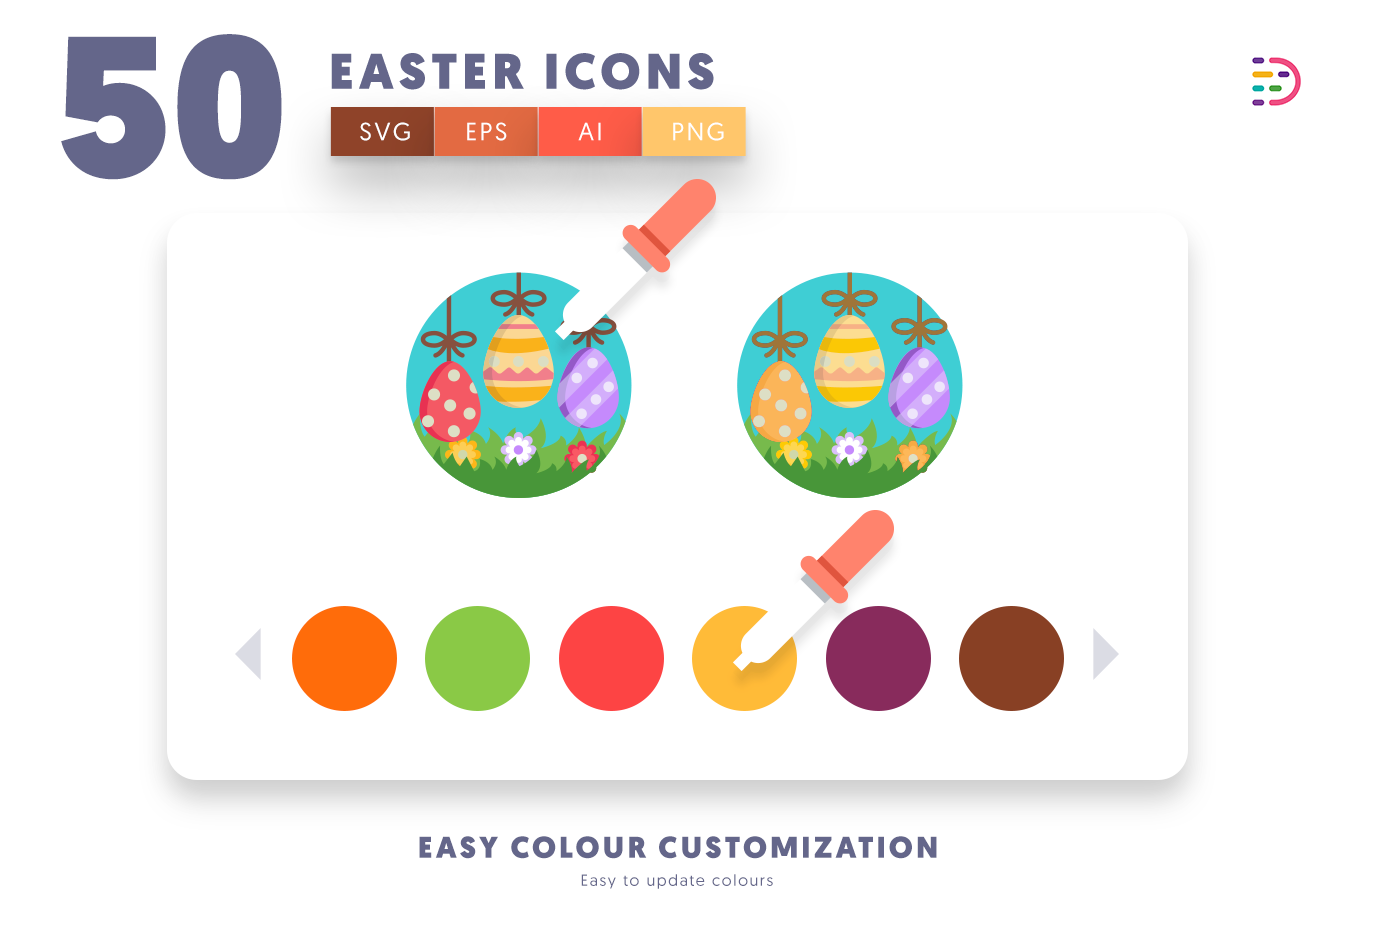 EPS, SVG, PNG full vector 50 Easter Icons